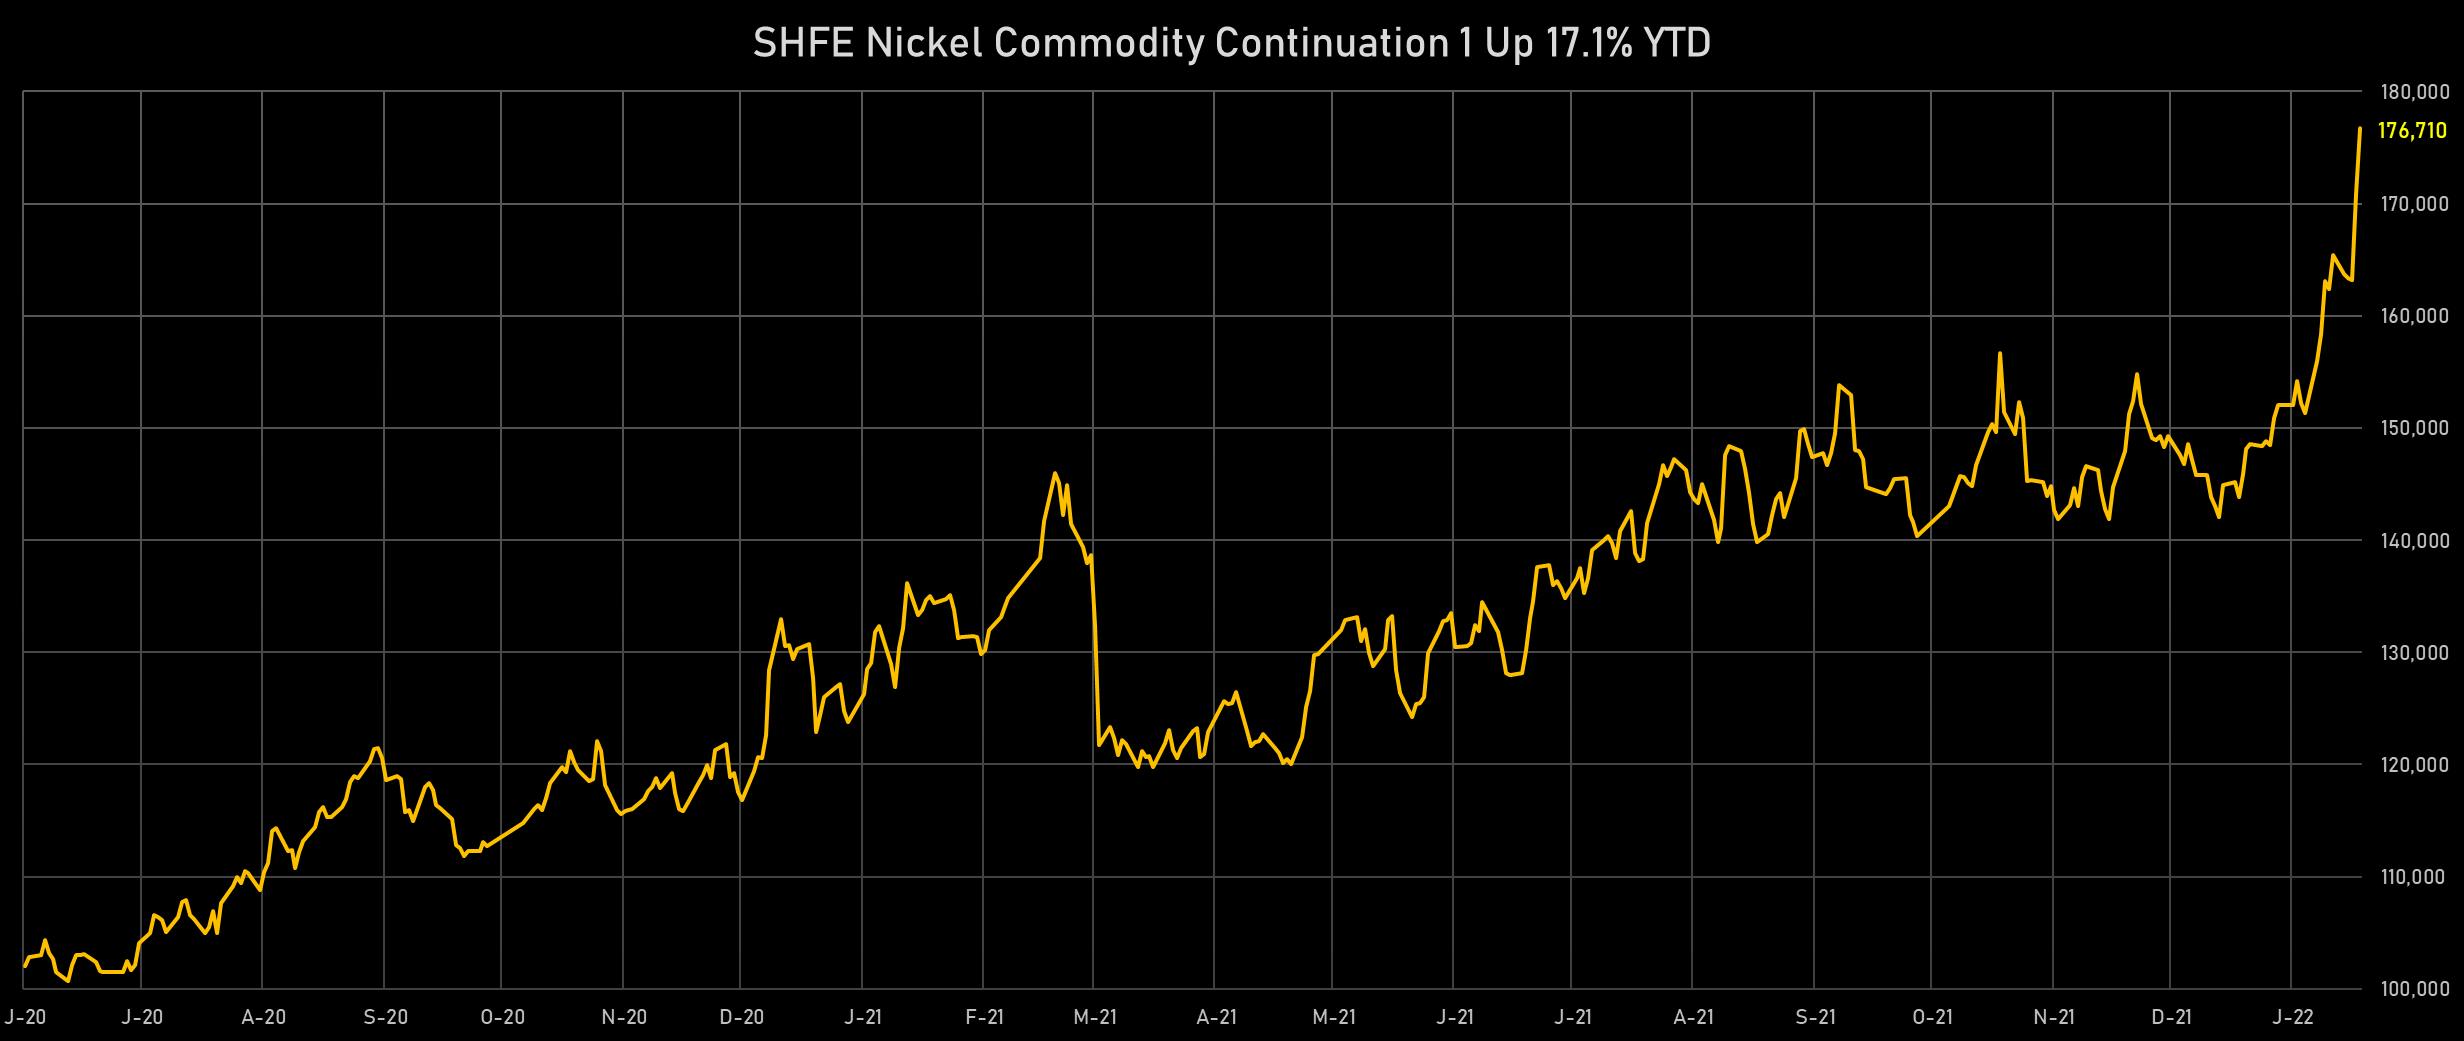 SHFE Nickel Front Month Futures Prices | Sources: phipost.com, Refinitiv data